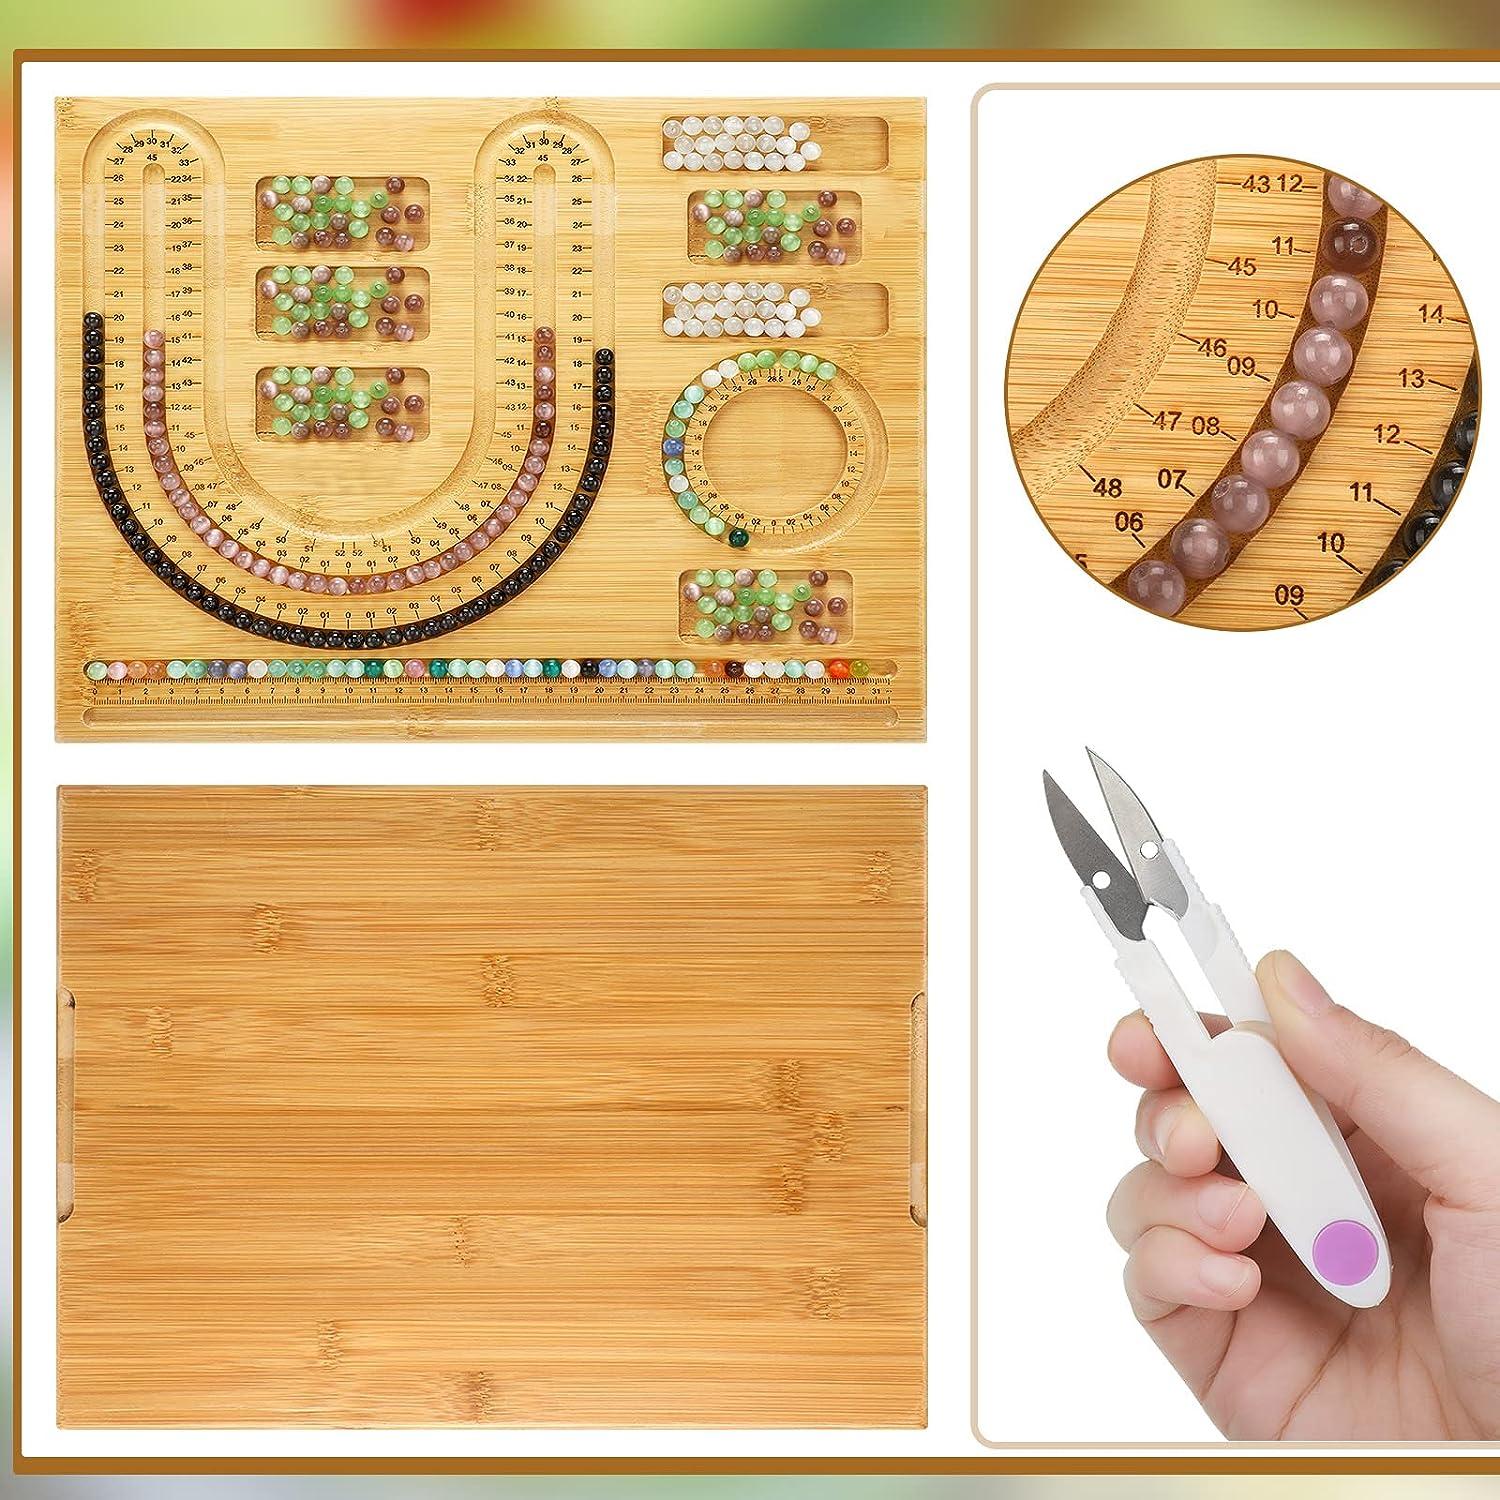  Jutom Bead Design Boards Bead Measuring Board Jewelry Design  Mats Beading Needles Jewelry String for DIY Bracelets Necklaces Craft  Supplies Tools Jewelry Making : Arts, Crafts & Sewing